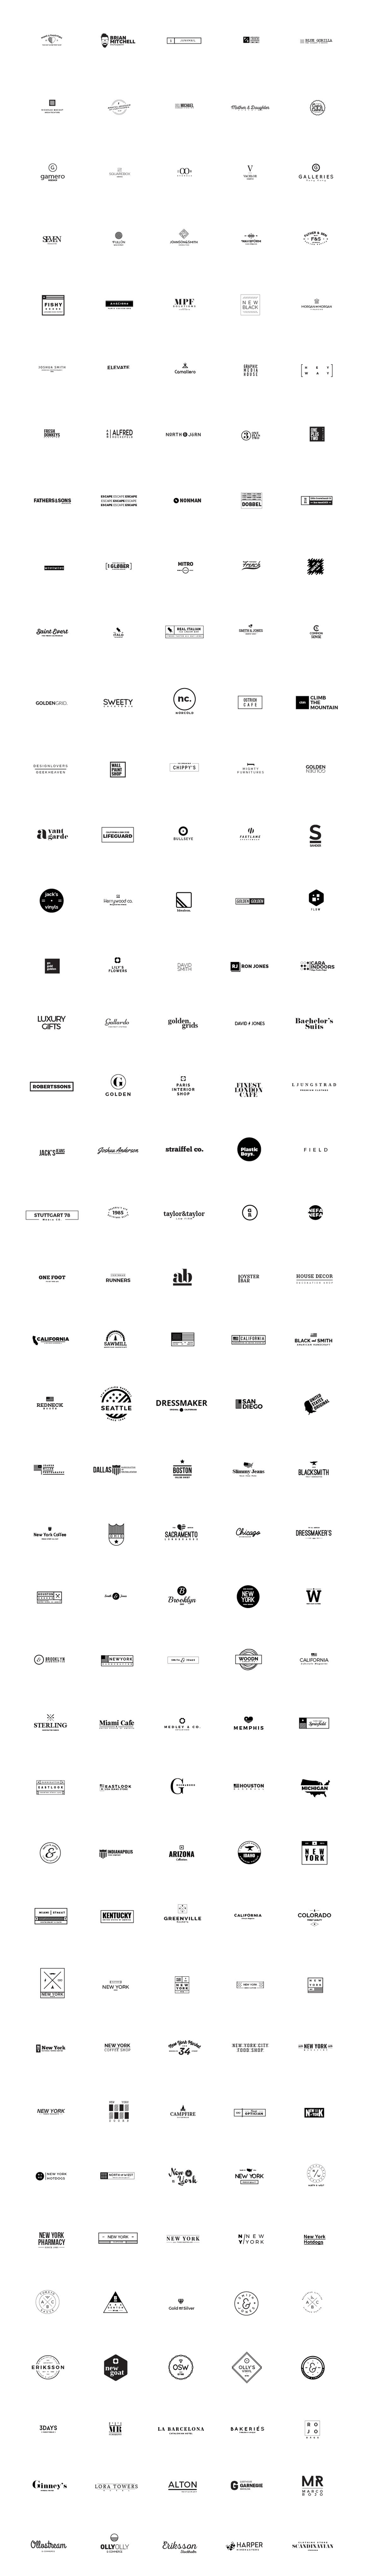 200 logos designed in 2 months (May - June 2015) by Mats-Peter Forss, a graphic designer based in Rauma, Finland.